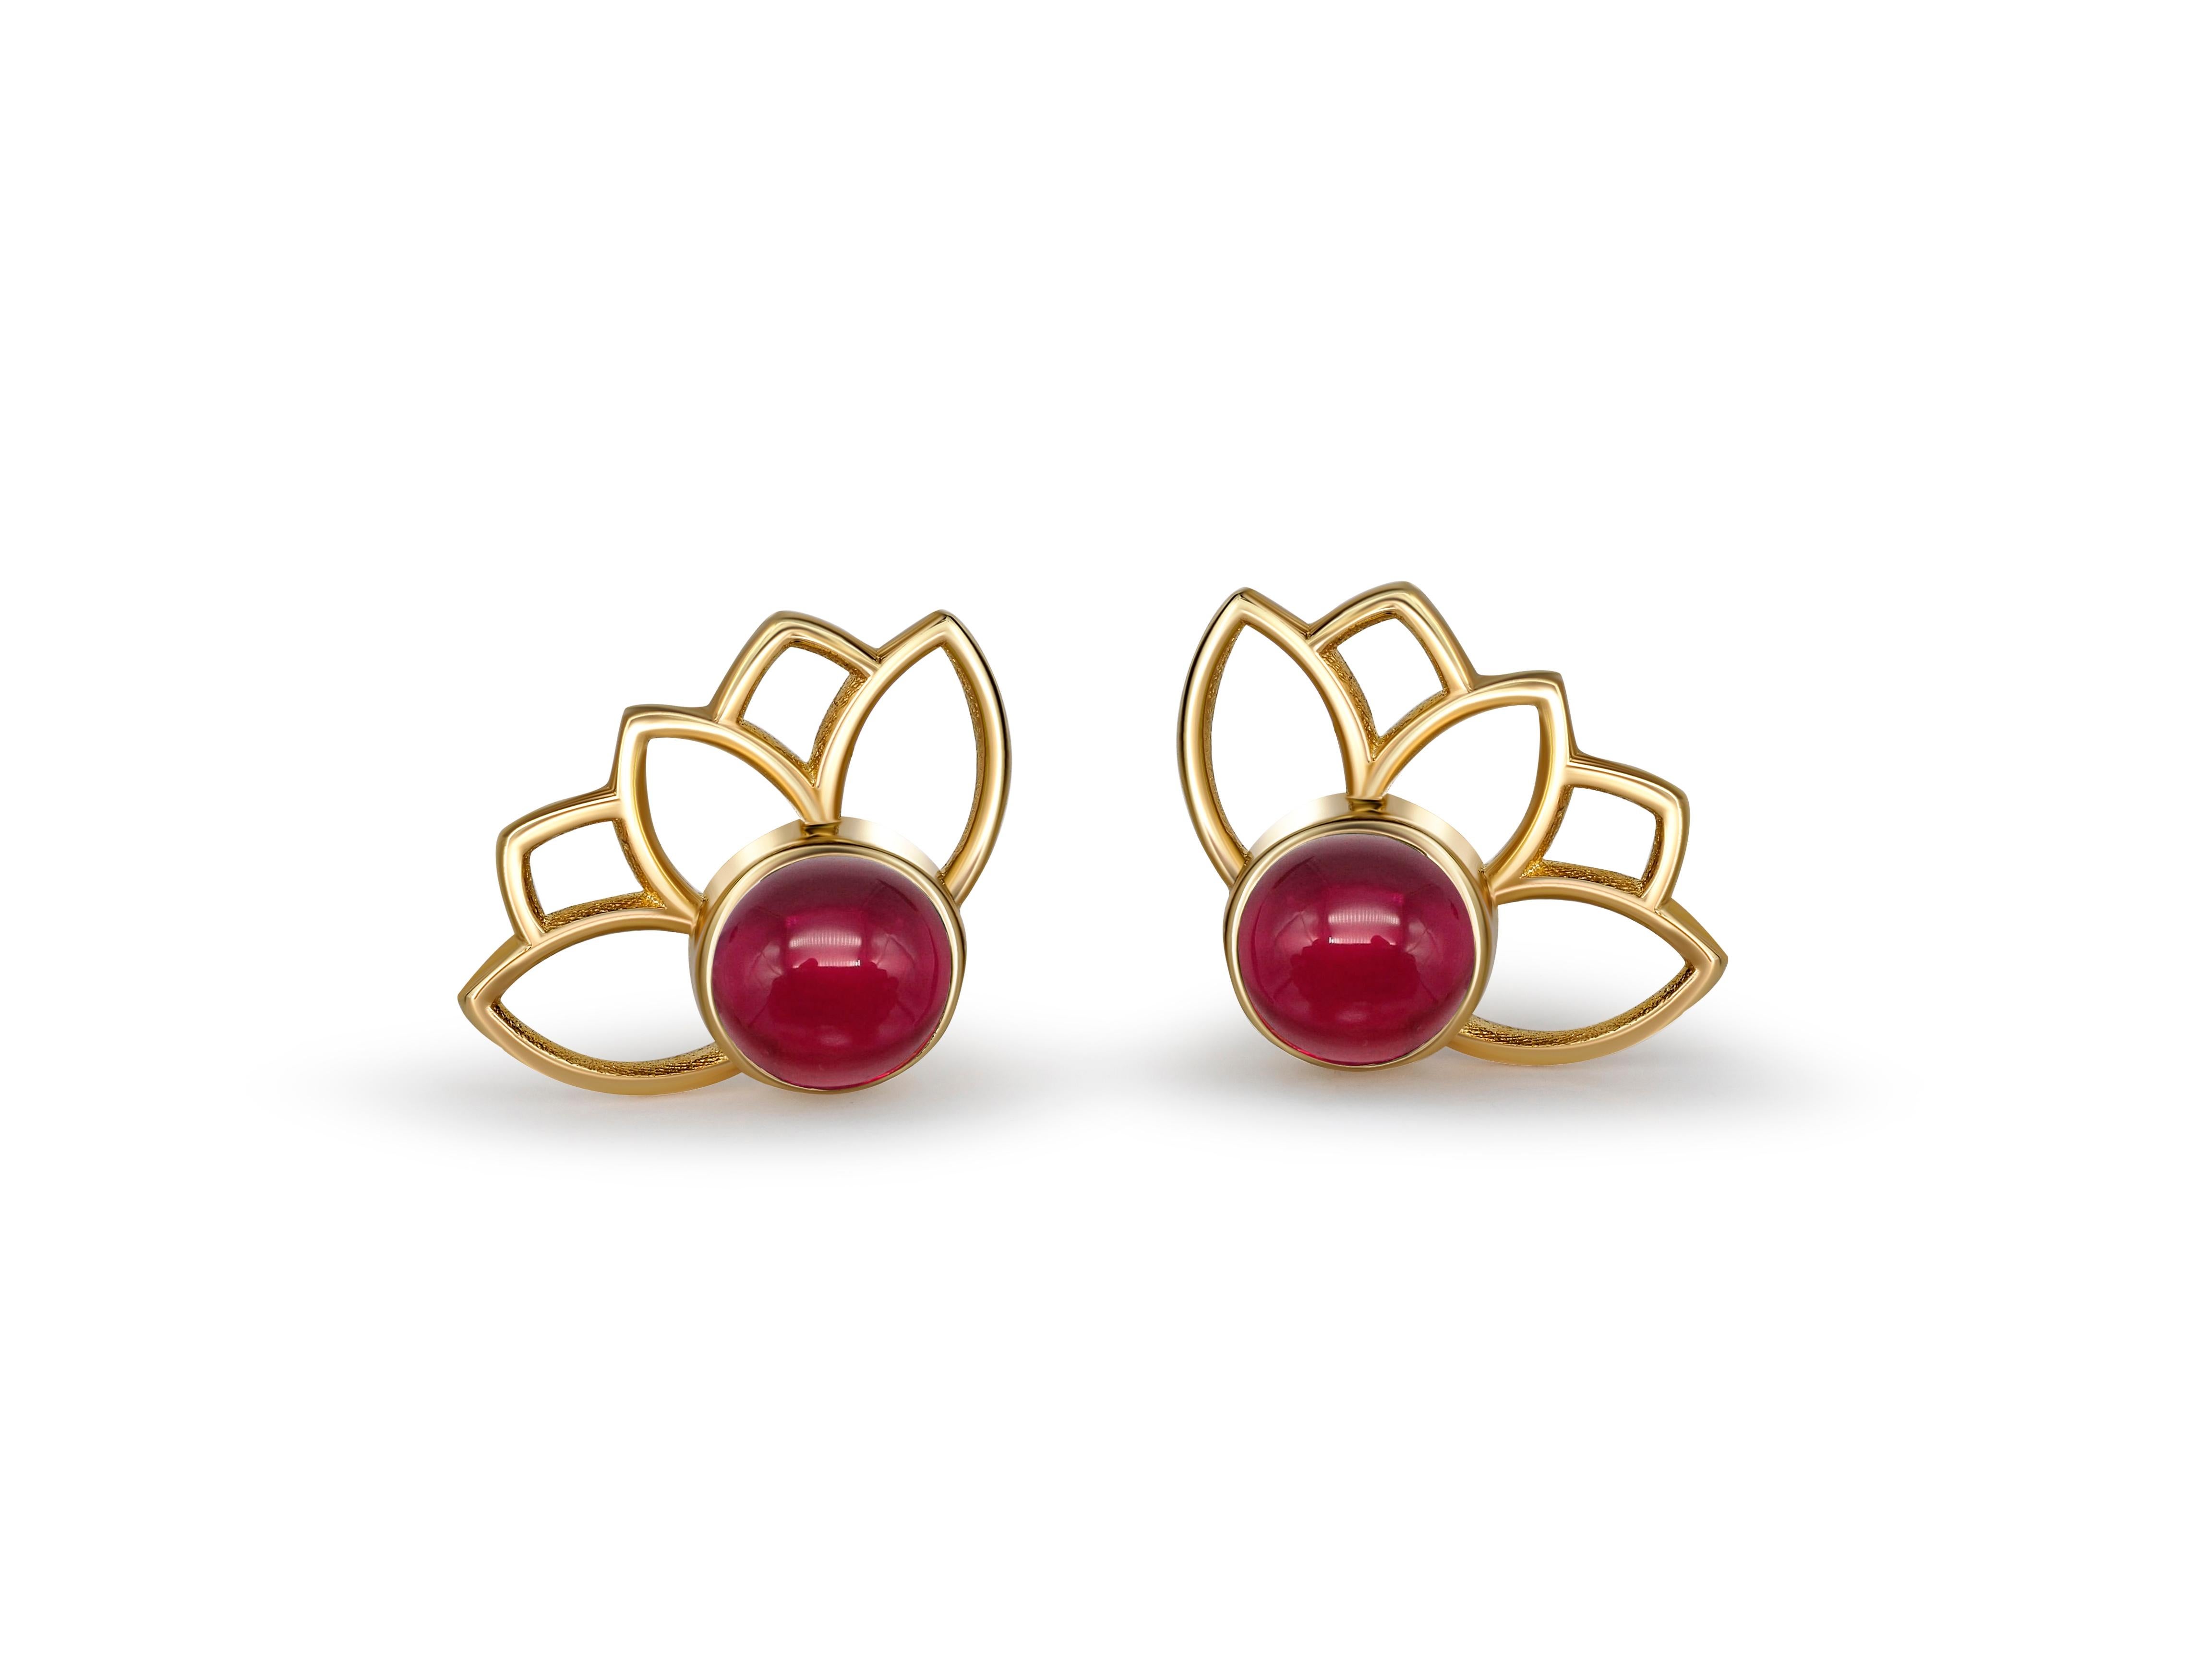 Lotus earrings studs with rubies in 14k gold. Rubies cabochon earrings. Ruby Gold Earrings. Flower gold earrings. 

Metal: 14 karat gold
Weight: 1.5 g. 
Size: 11.45 x 8.35 mm.
Set with genuine  rubies: weight - 0.45 ct x 2 = 0.90 ct total.
Red